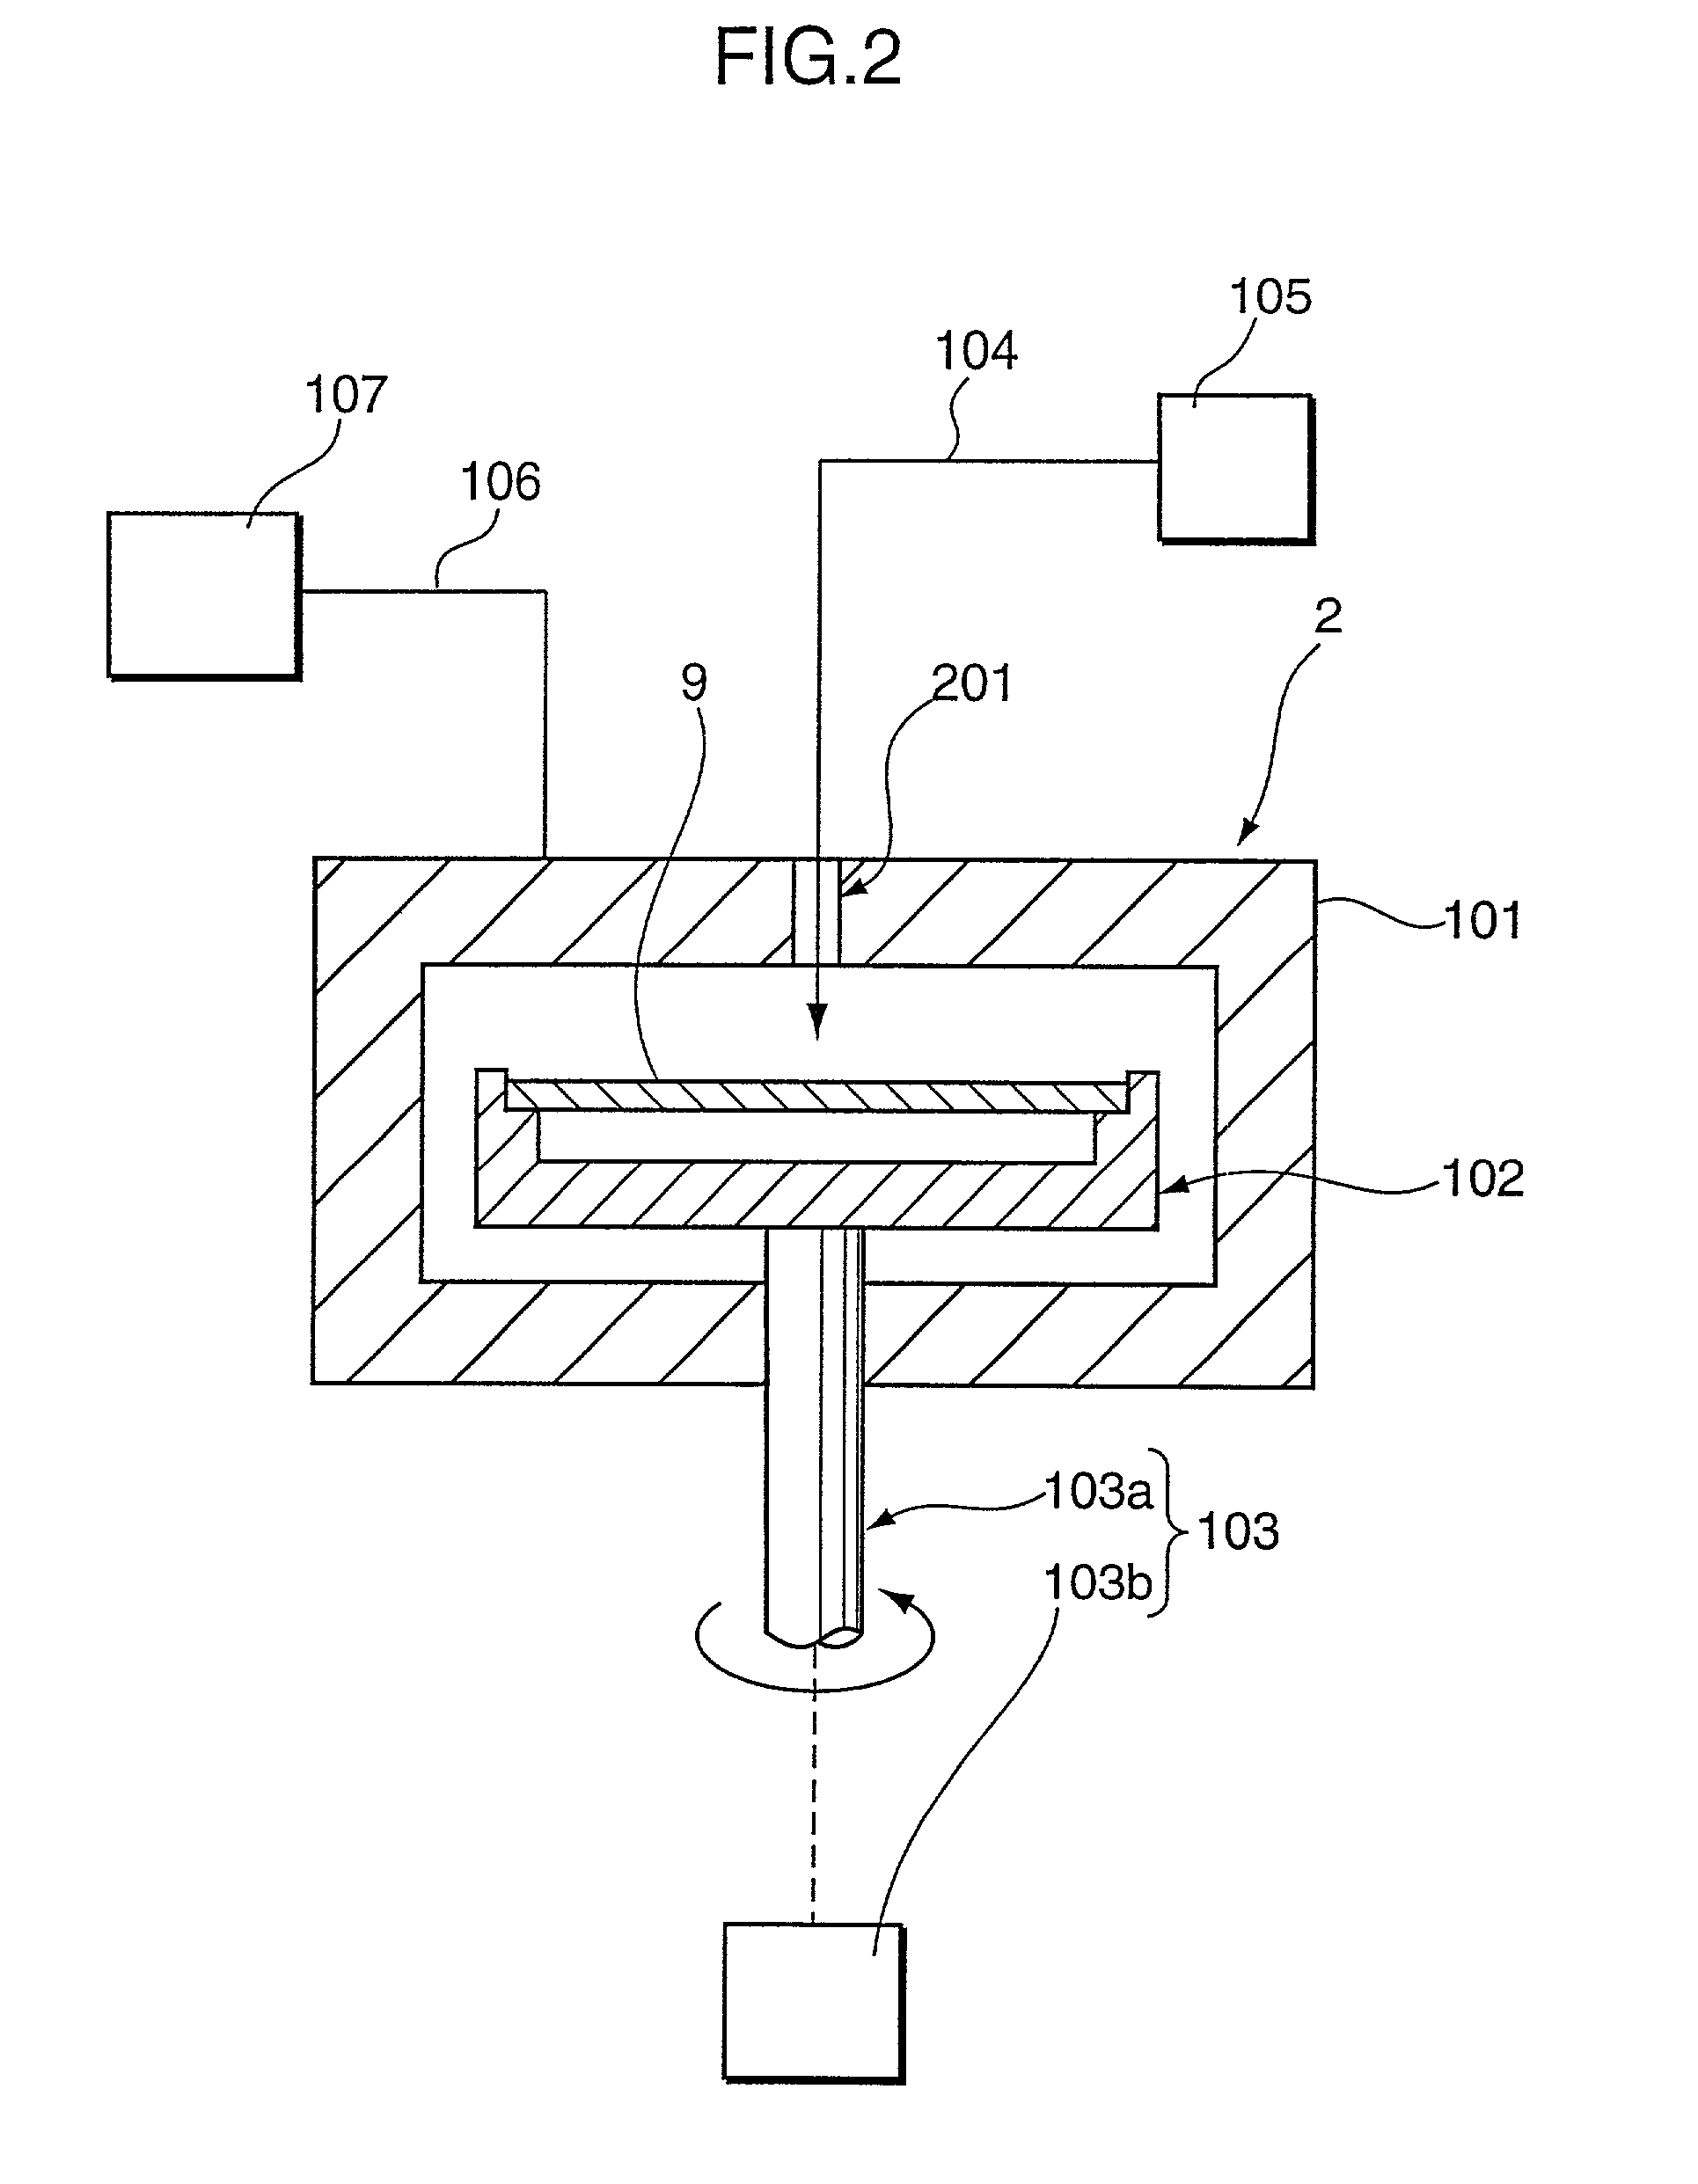 Method and system for processing substrate